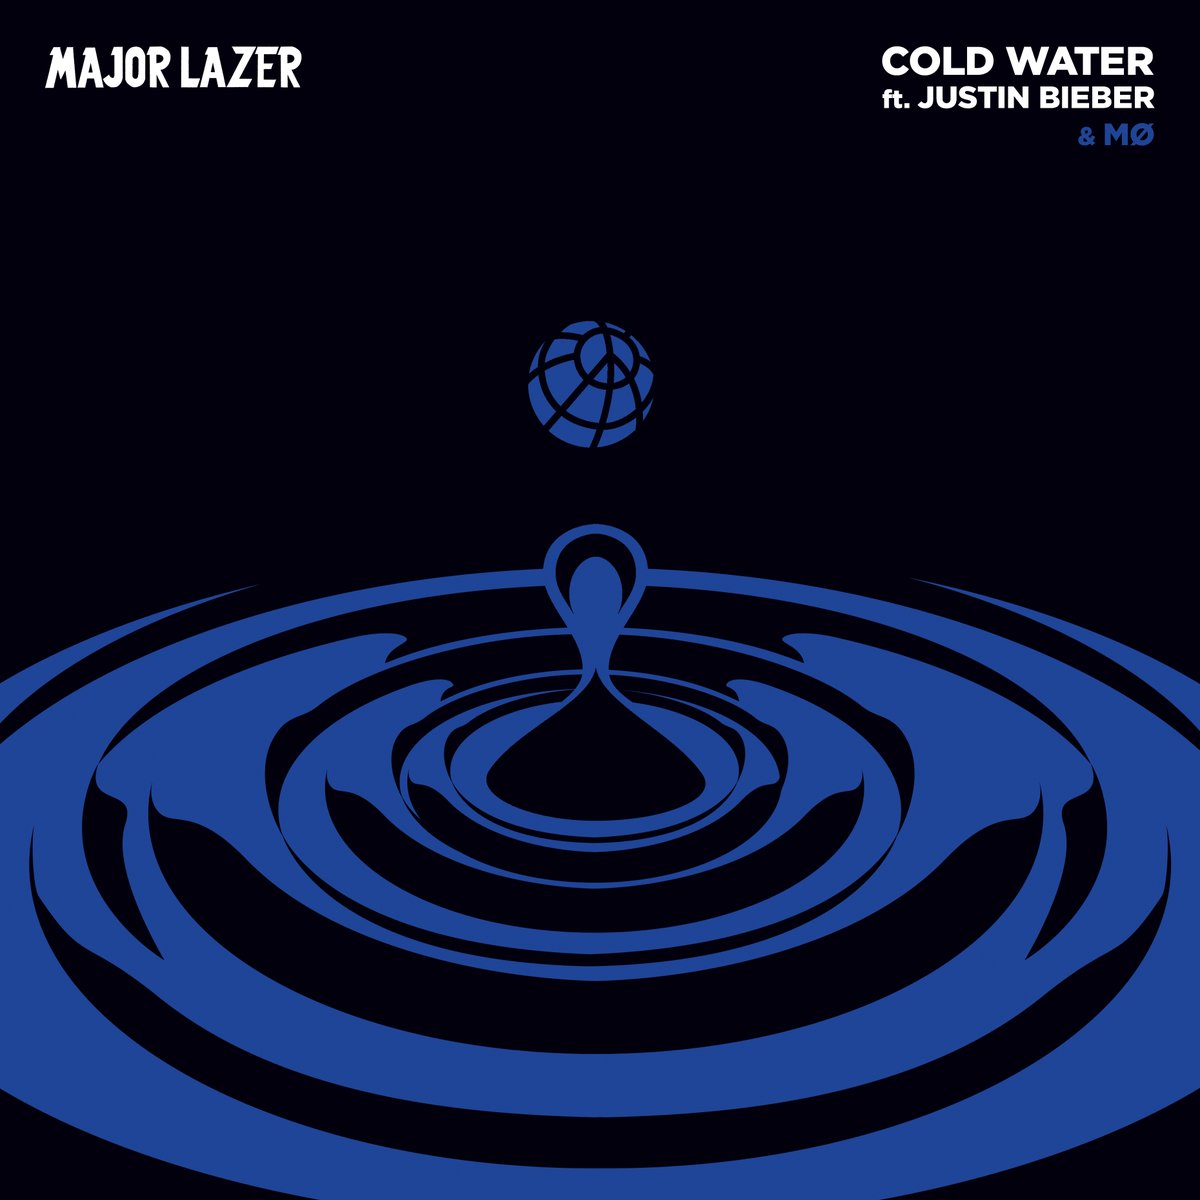 Cold Water (Major Lazer Song feat. MØ)